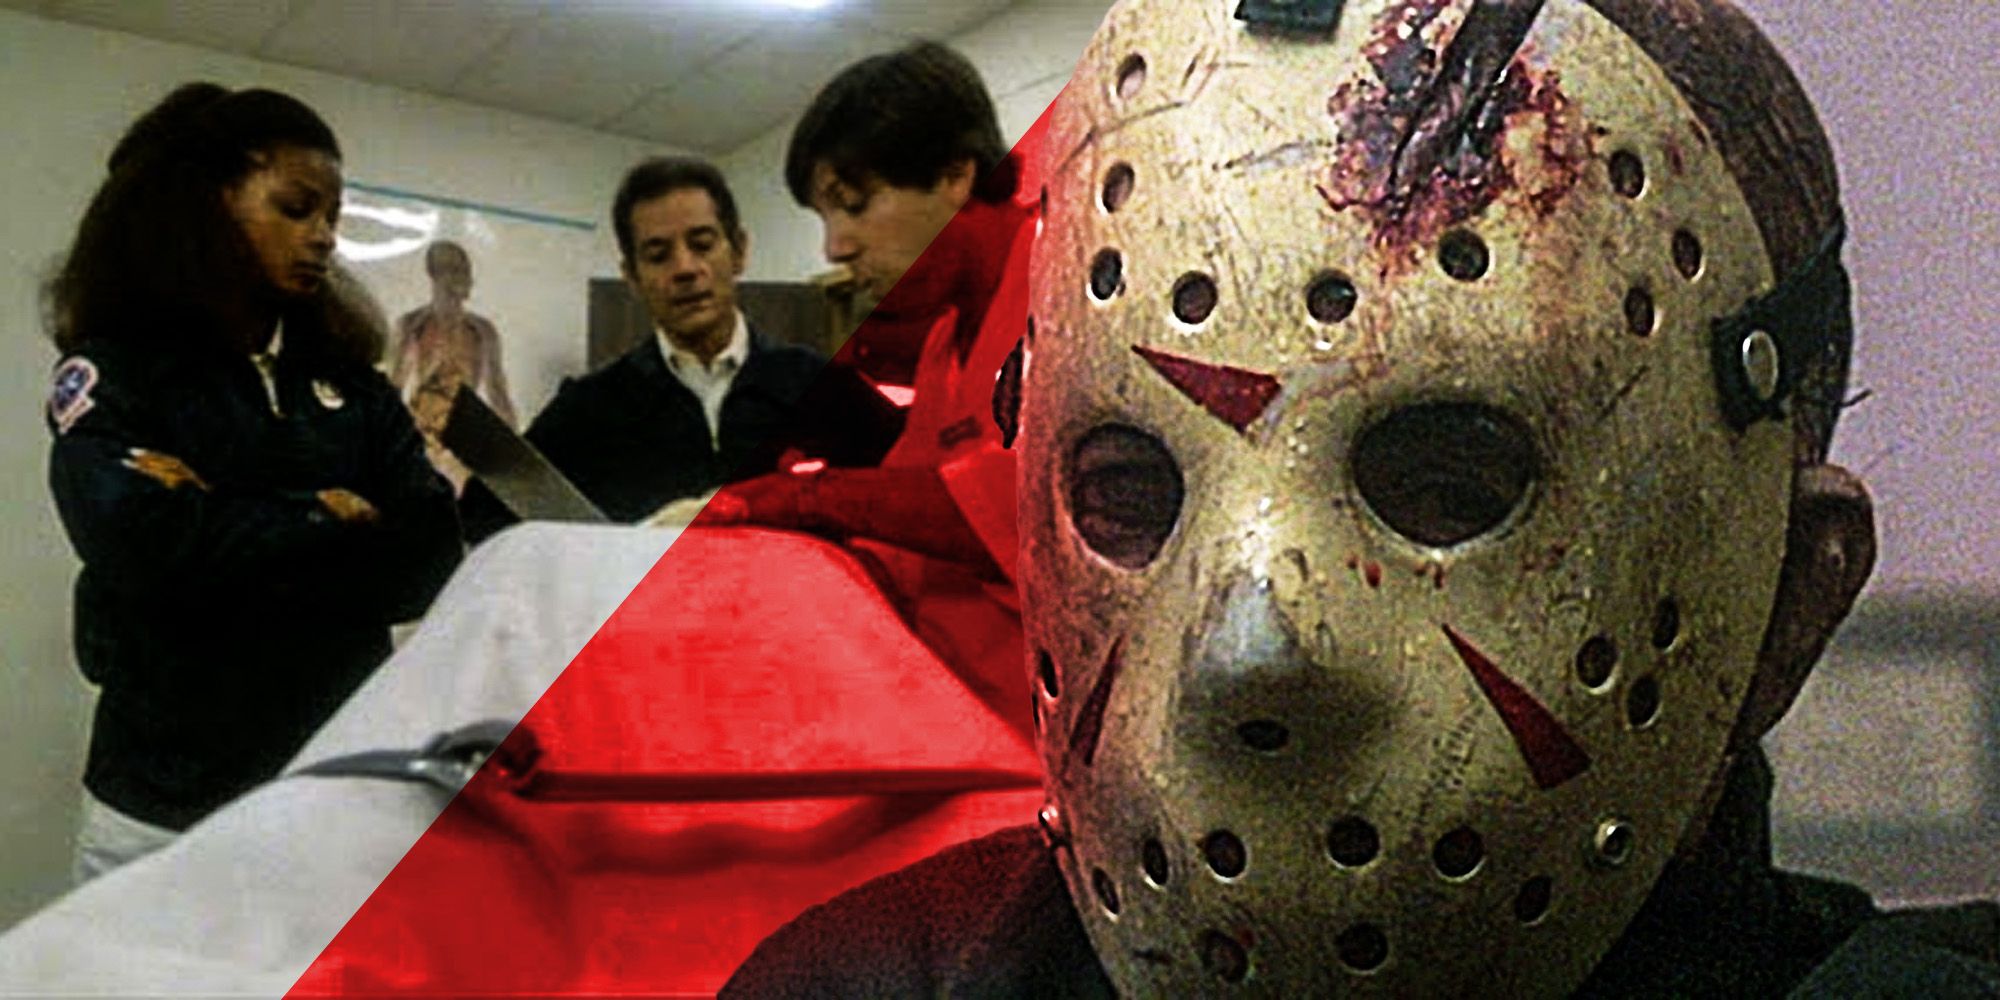 Friday the 13th part 4 jason return audience complicit